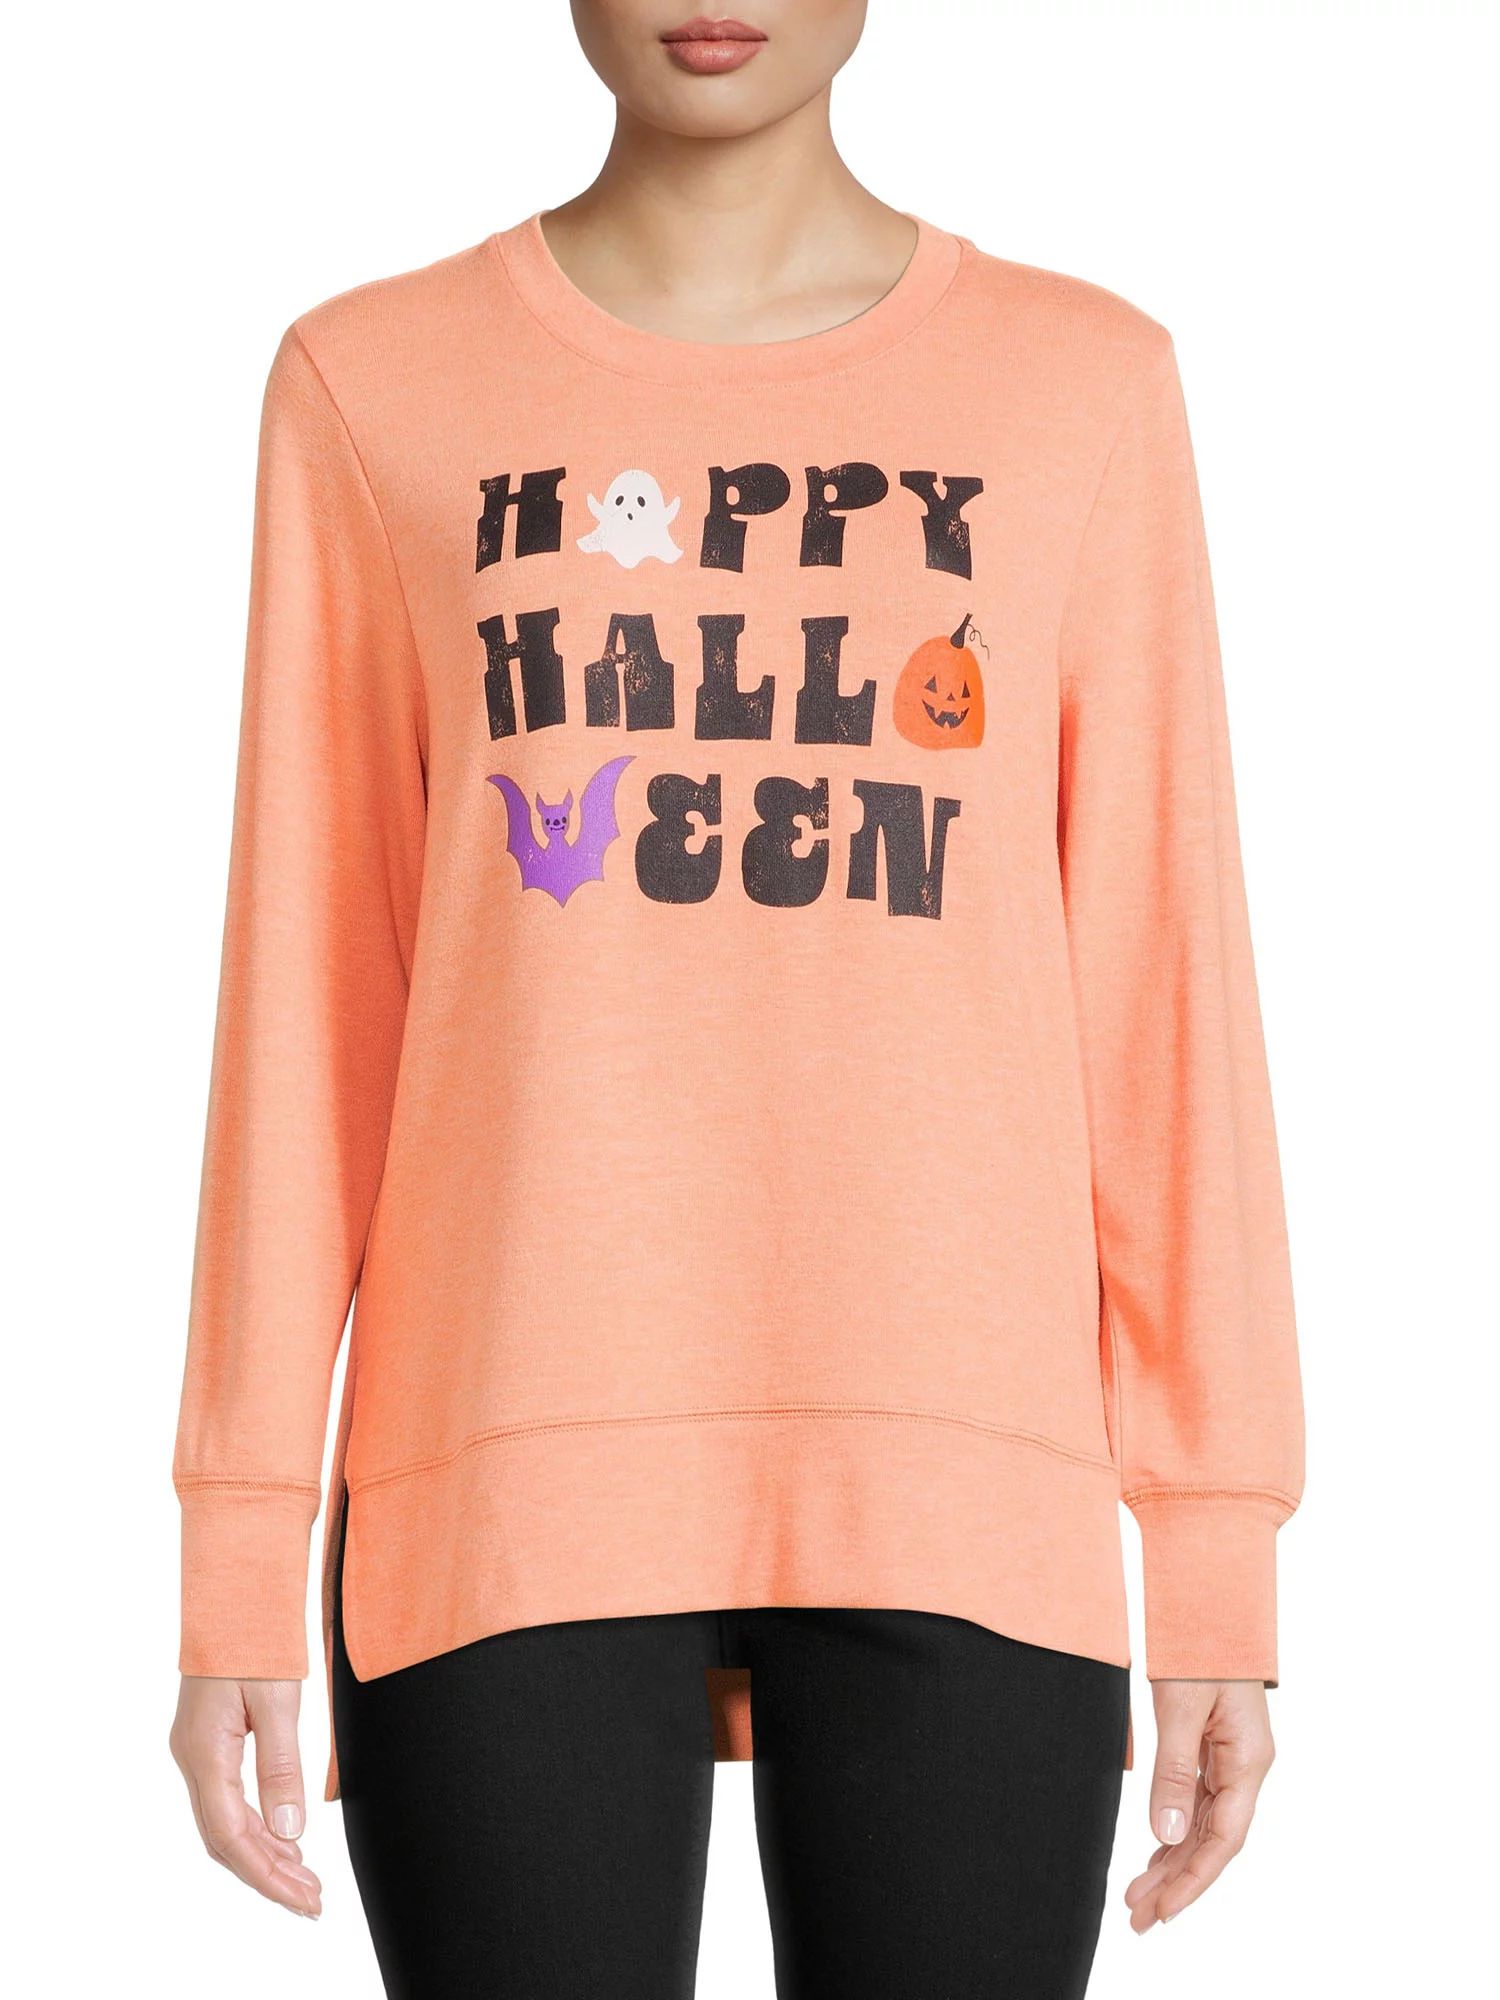 WAY TO CELEBRATE WOMEN'S LONG SLEEVE HAPPY LETTERS HACCI PULLOVER | Walmart (US)